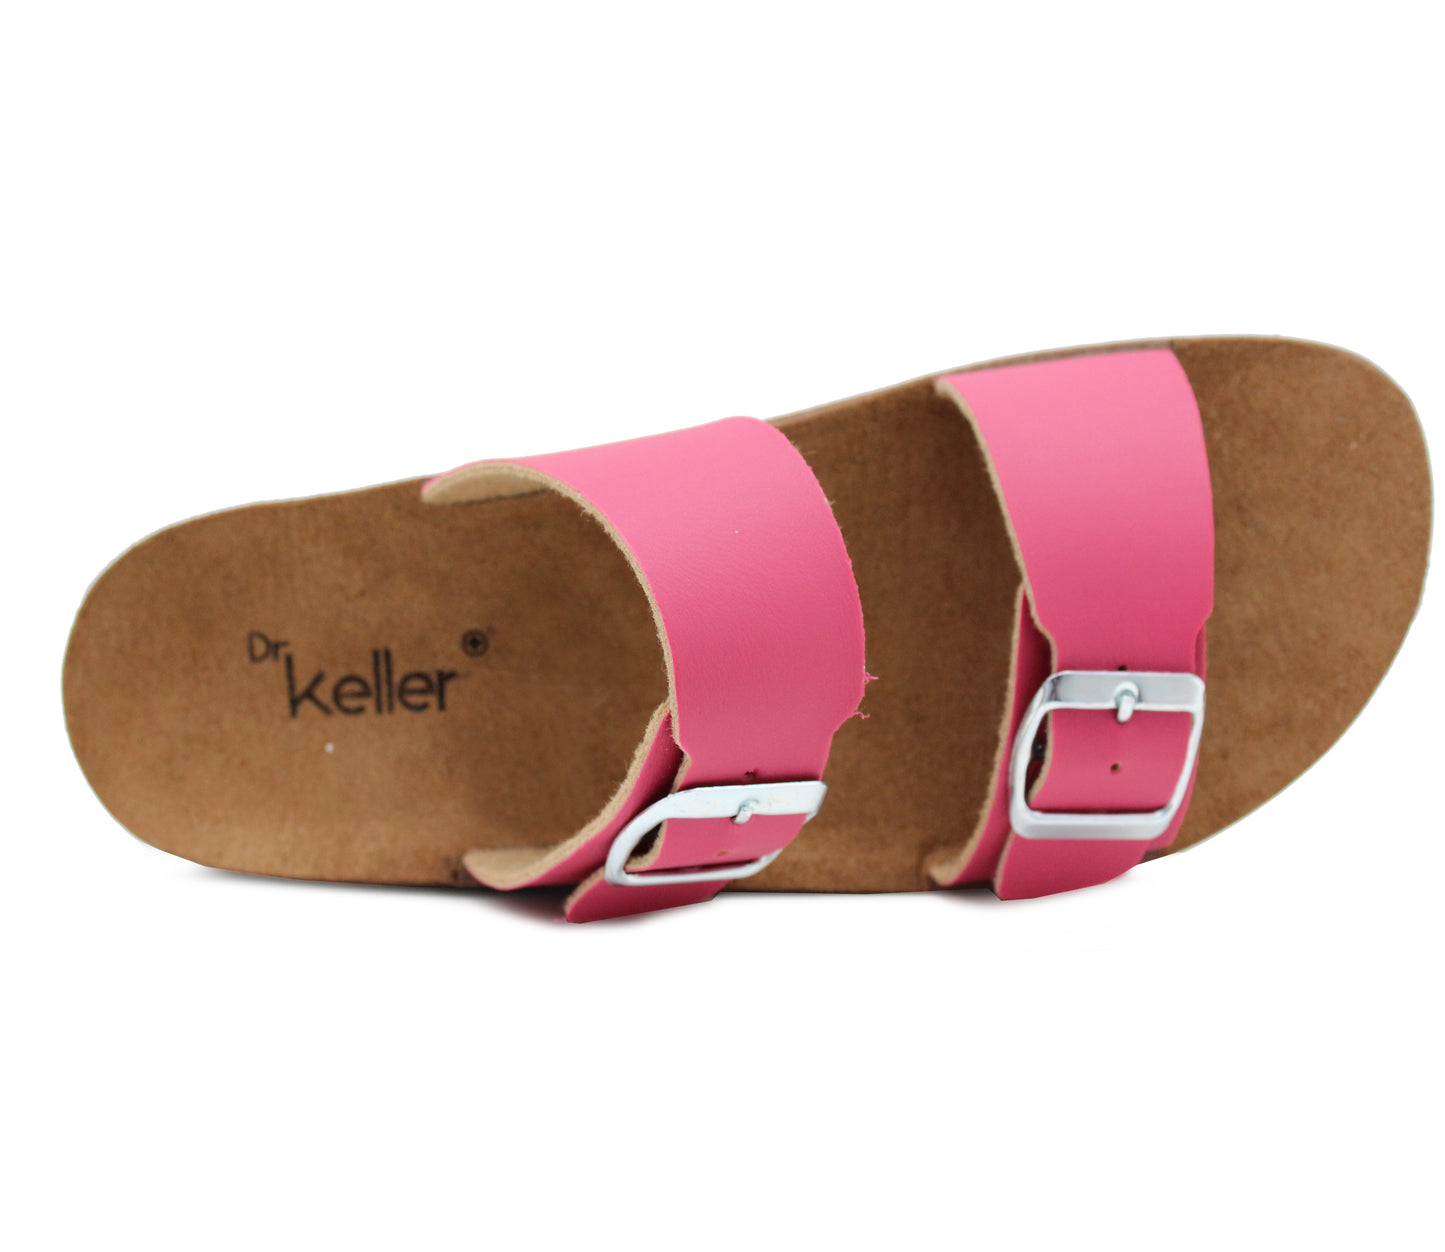 Womens Twin Buckle Strap Sandals in Fuchsia Pink Adjustable Slip On Mule Flat Summer Casual Ladies Fashion Slides